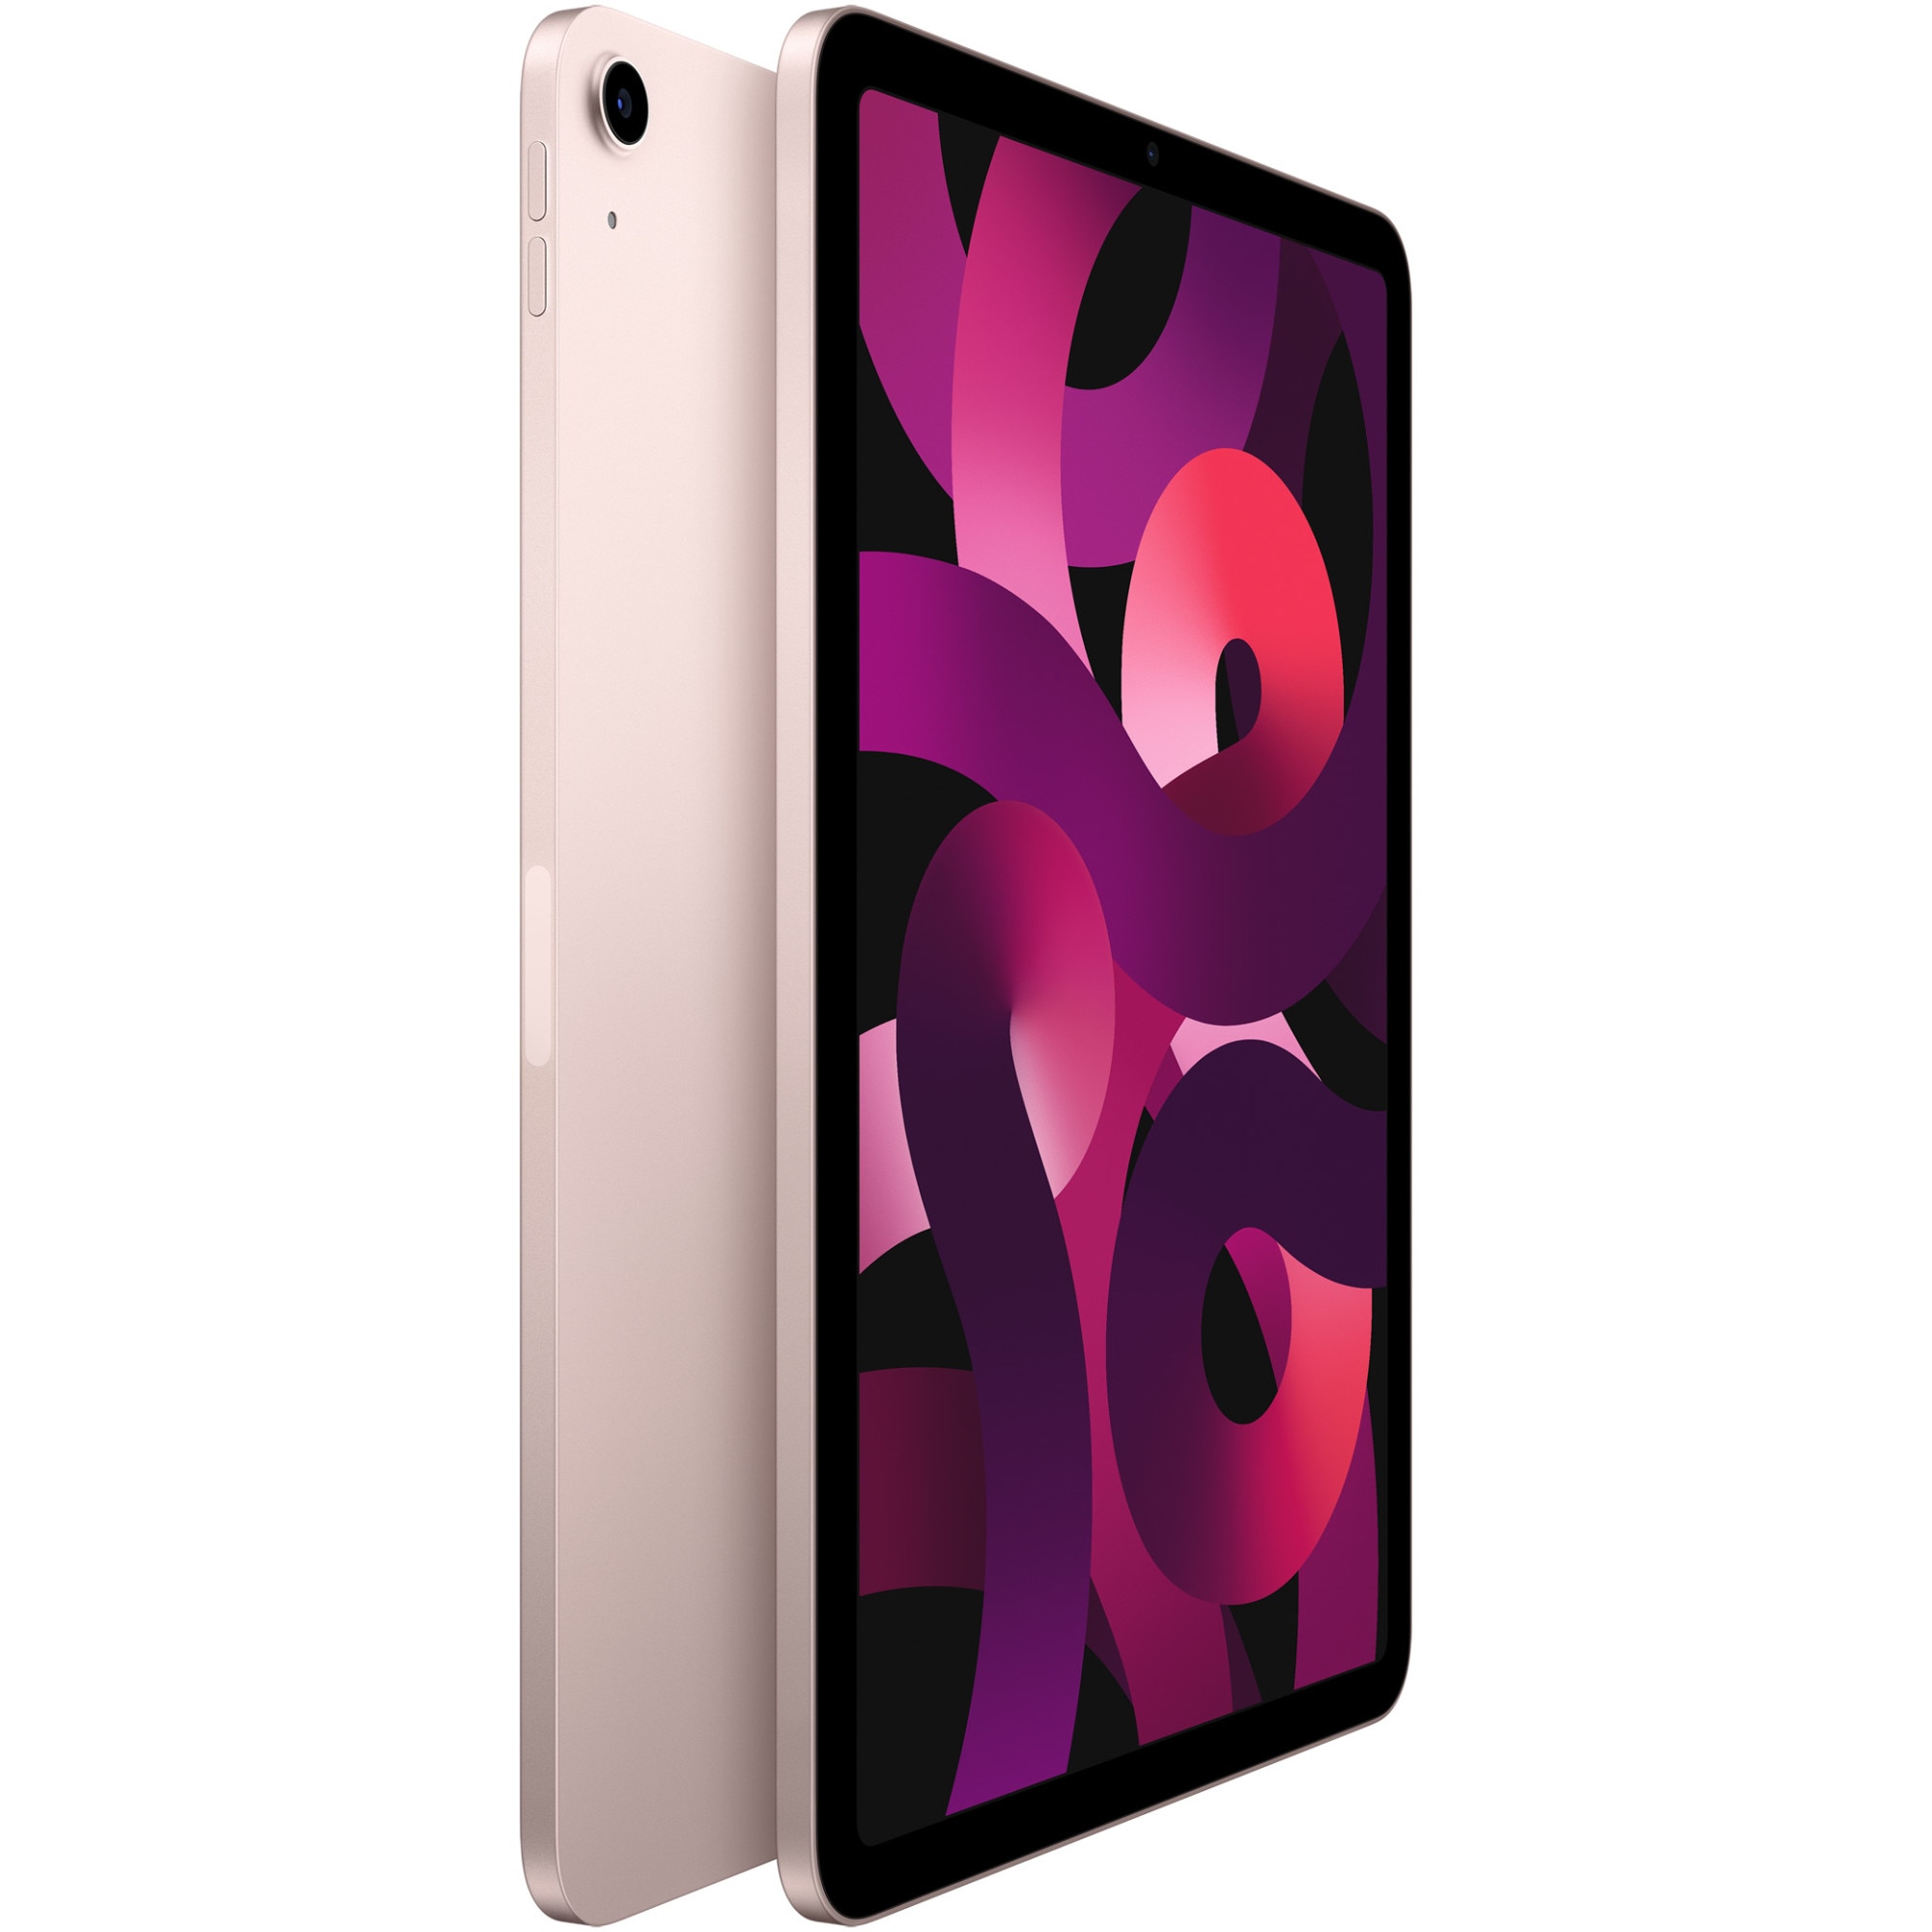 graphic input Bitterness Apple iPad Air 5 (2022), 10.9", 64GB, Wi-Fi, Pink - eMAG.ro